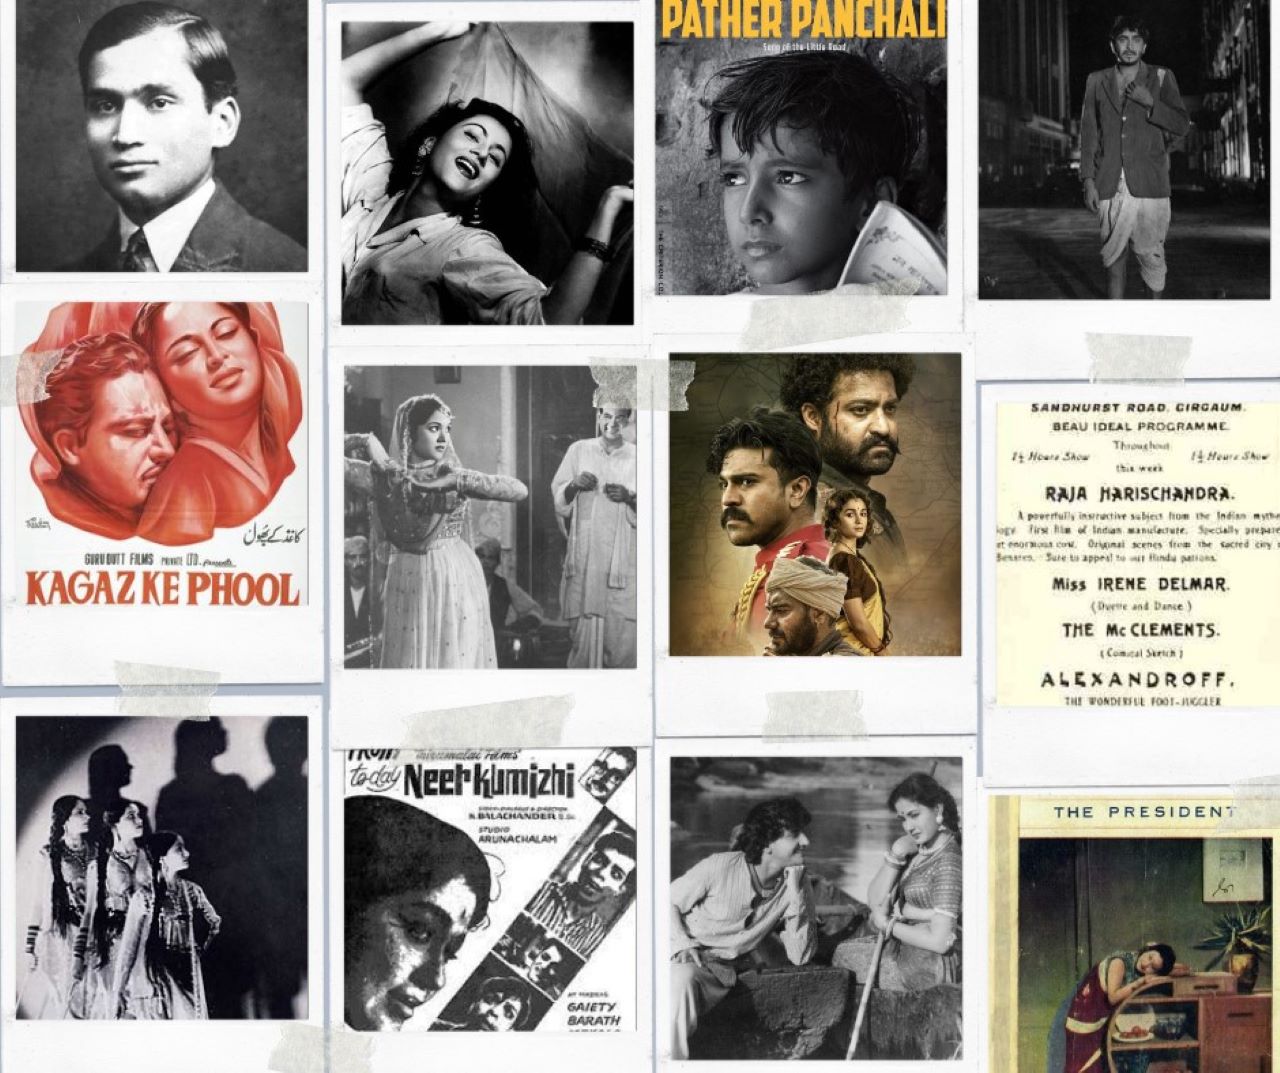 Histories and Contexts of Cinema - Bollywood and Beyond